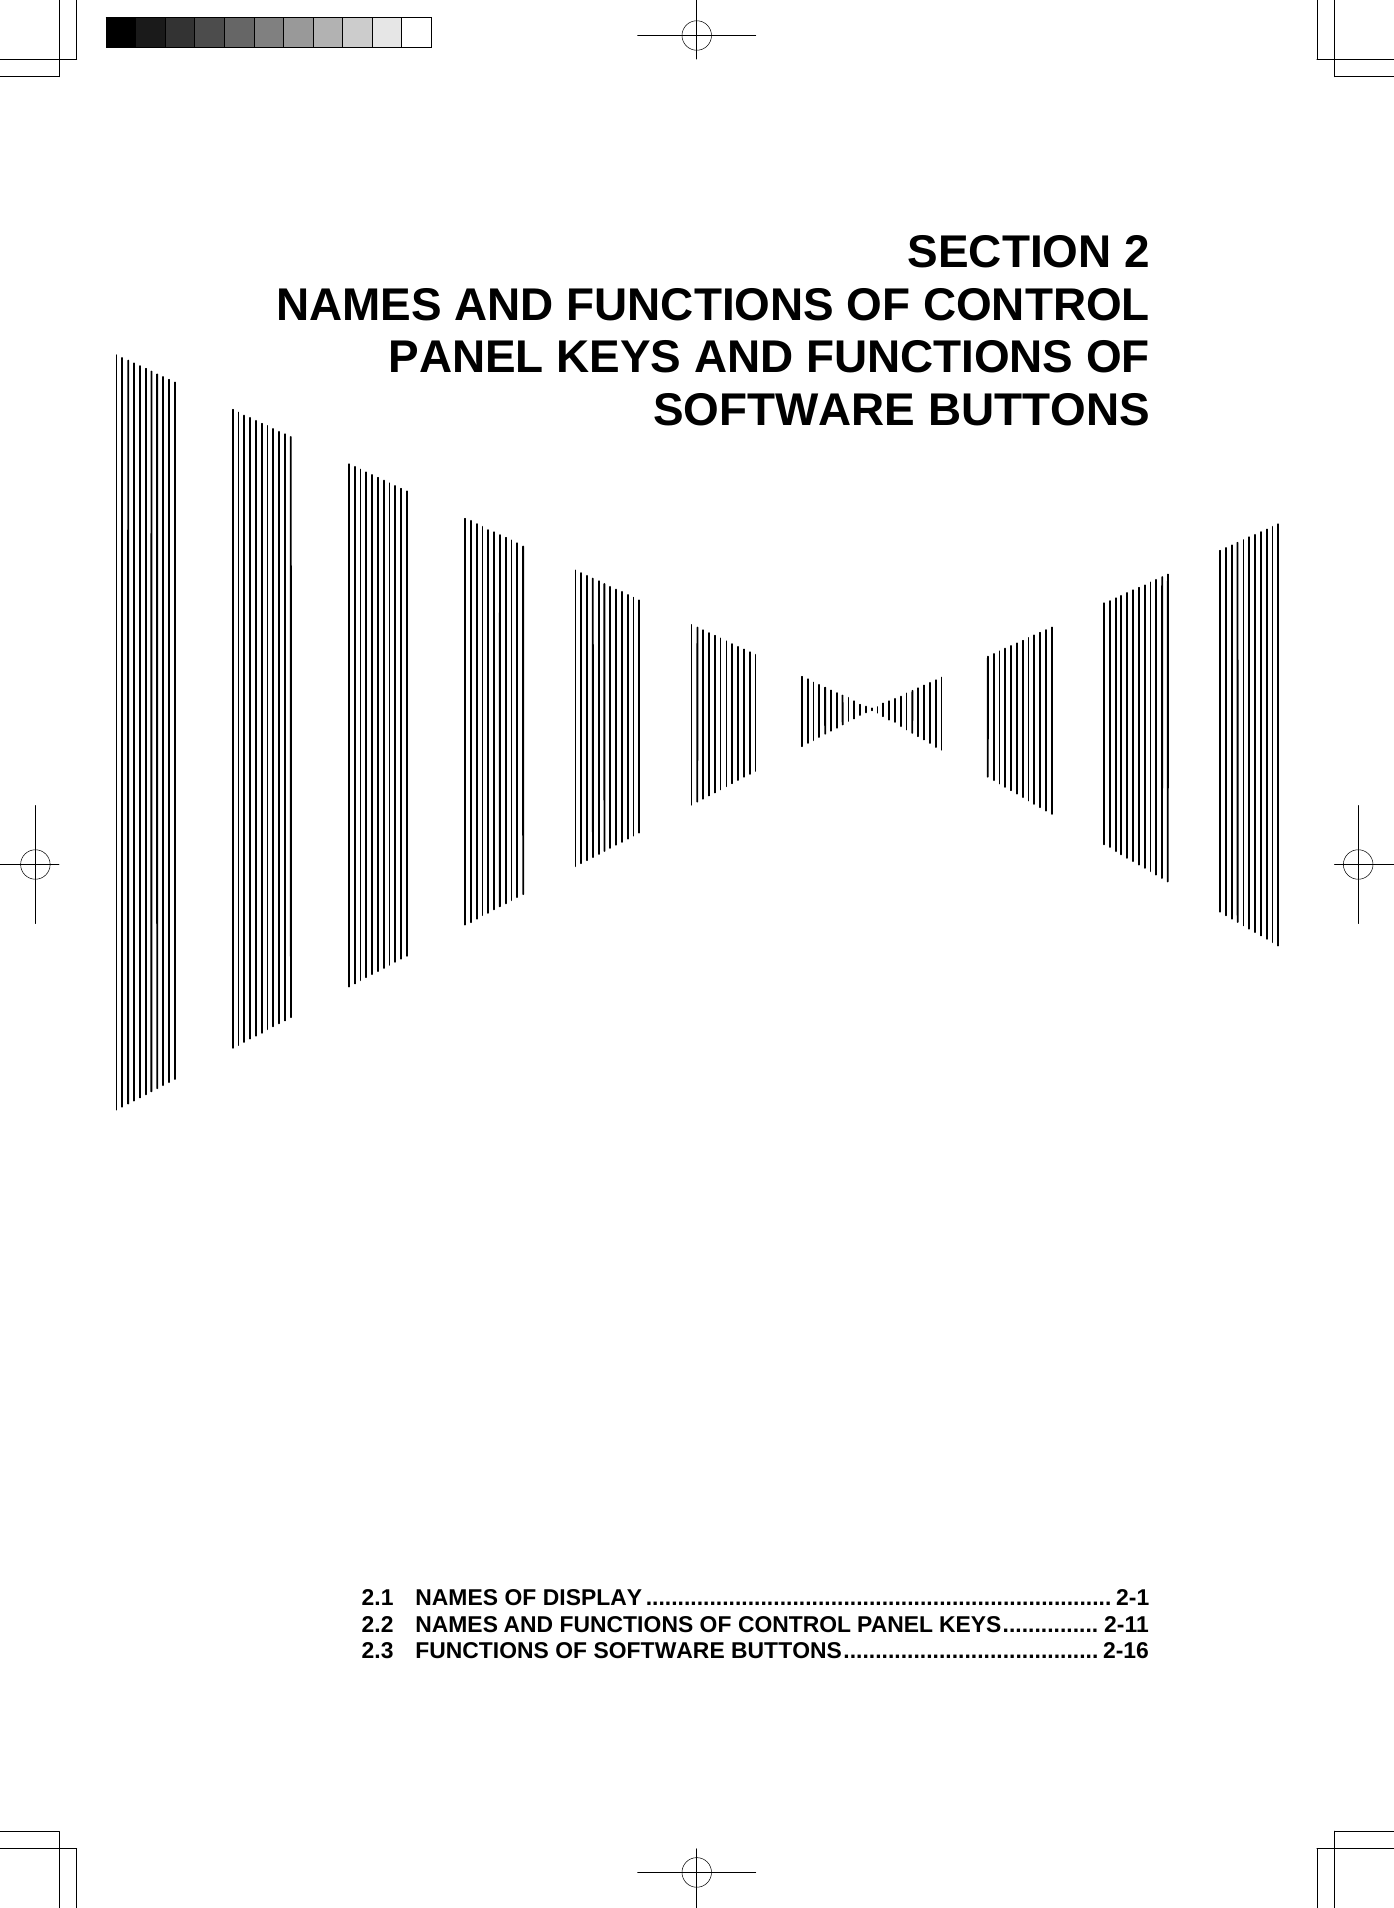   SECTION 2 NAMES AND FUNCTIONS OF CONTROL PANEL KEYS AND FUNCTIONS OF SOFTWARE BUTTONS                                                 2.1 NAMES OF DISPLAY......................................................................... 2-1 2.2 NAMES AND FUNCTIONS OF CONTROL PANEL KEYS............... 2-11 2.3 FUNCTIONS OF SOFTWARE BUTTONS........................................ 2-16 